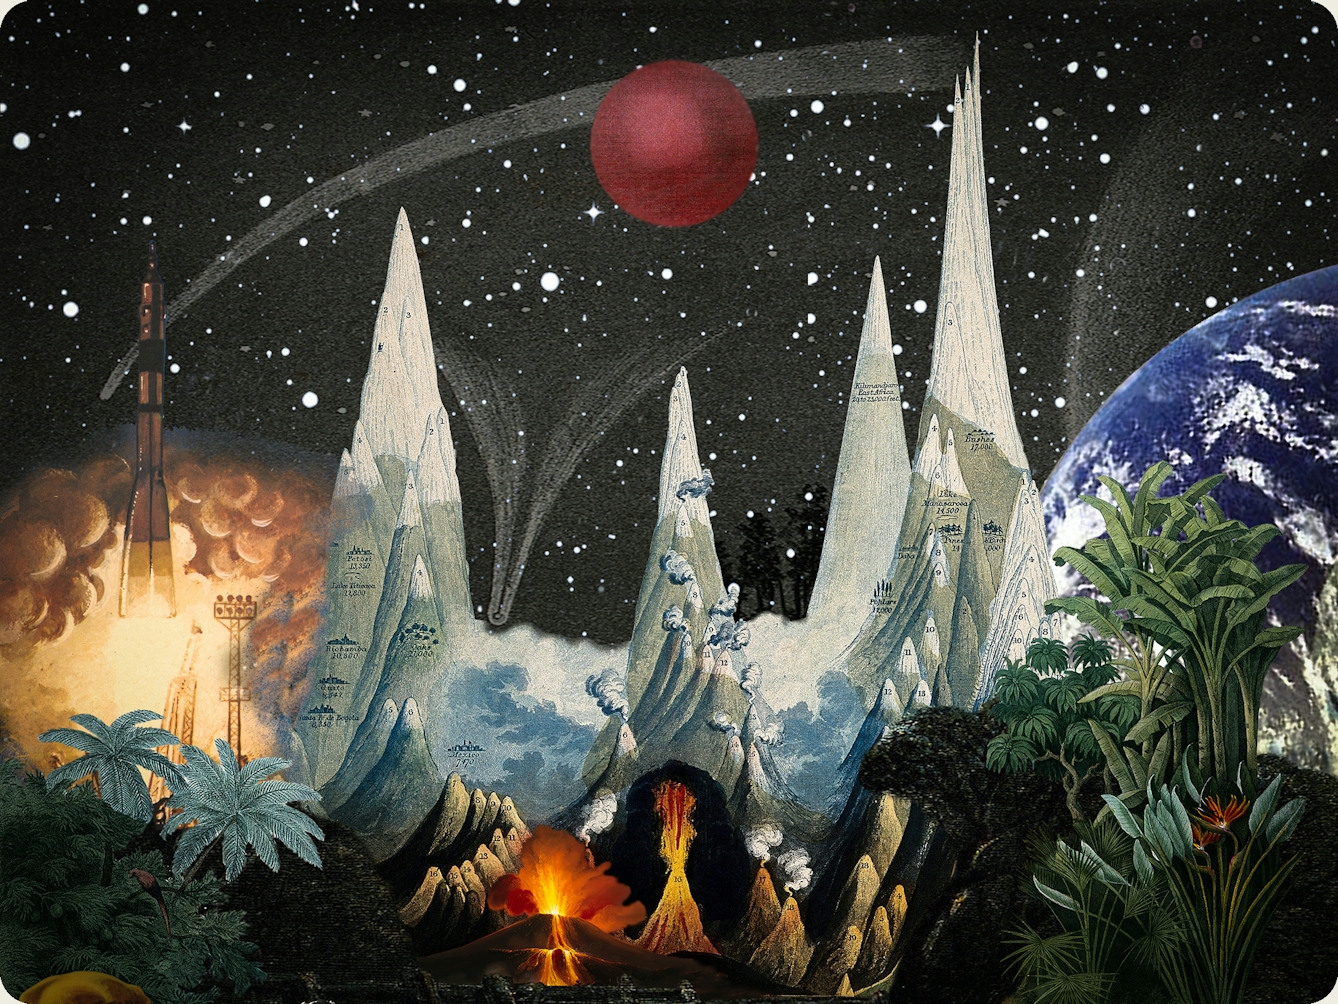 Artwork using collage. The collaged elements are made up of archive material which includes vintage and contemporary photographs, etchings, painted illustrations, lithographic prints and line drawings. This artwork depicts a scene with elements of outer space. In the background is a dark starry sky with a small red planet and a large blue and green planet Earth rising over horizon. In the middle distance on the left hand side are tall thin volcanic like mountain peaks, some of which are erupting. A space rocket is taking off, with jets of fire and smoke. To the right is green foliage 